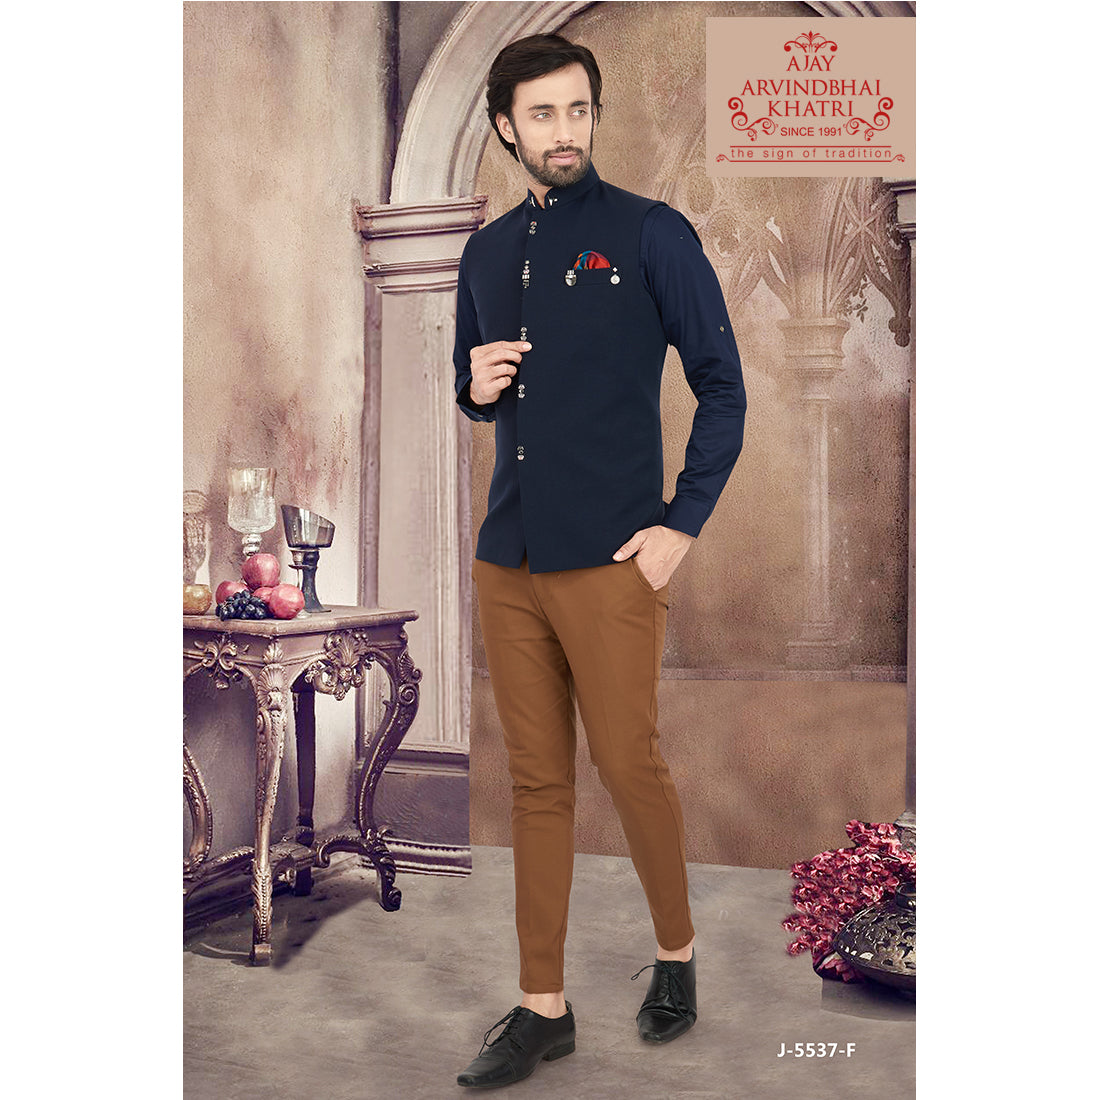 Art Silk Kurta Pajama With Jacket In White And Navy Blue Colour - KP5750220